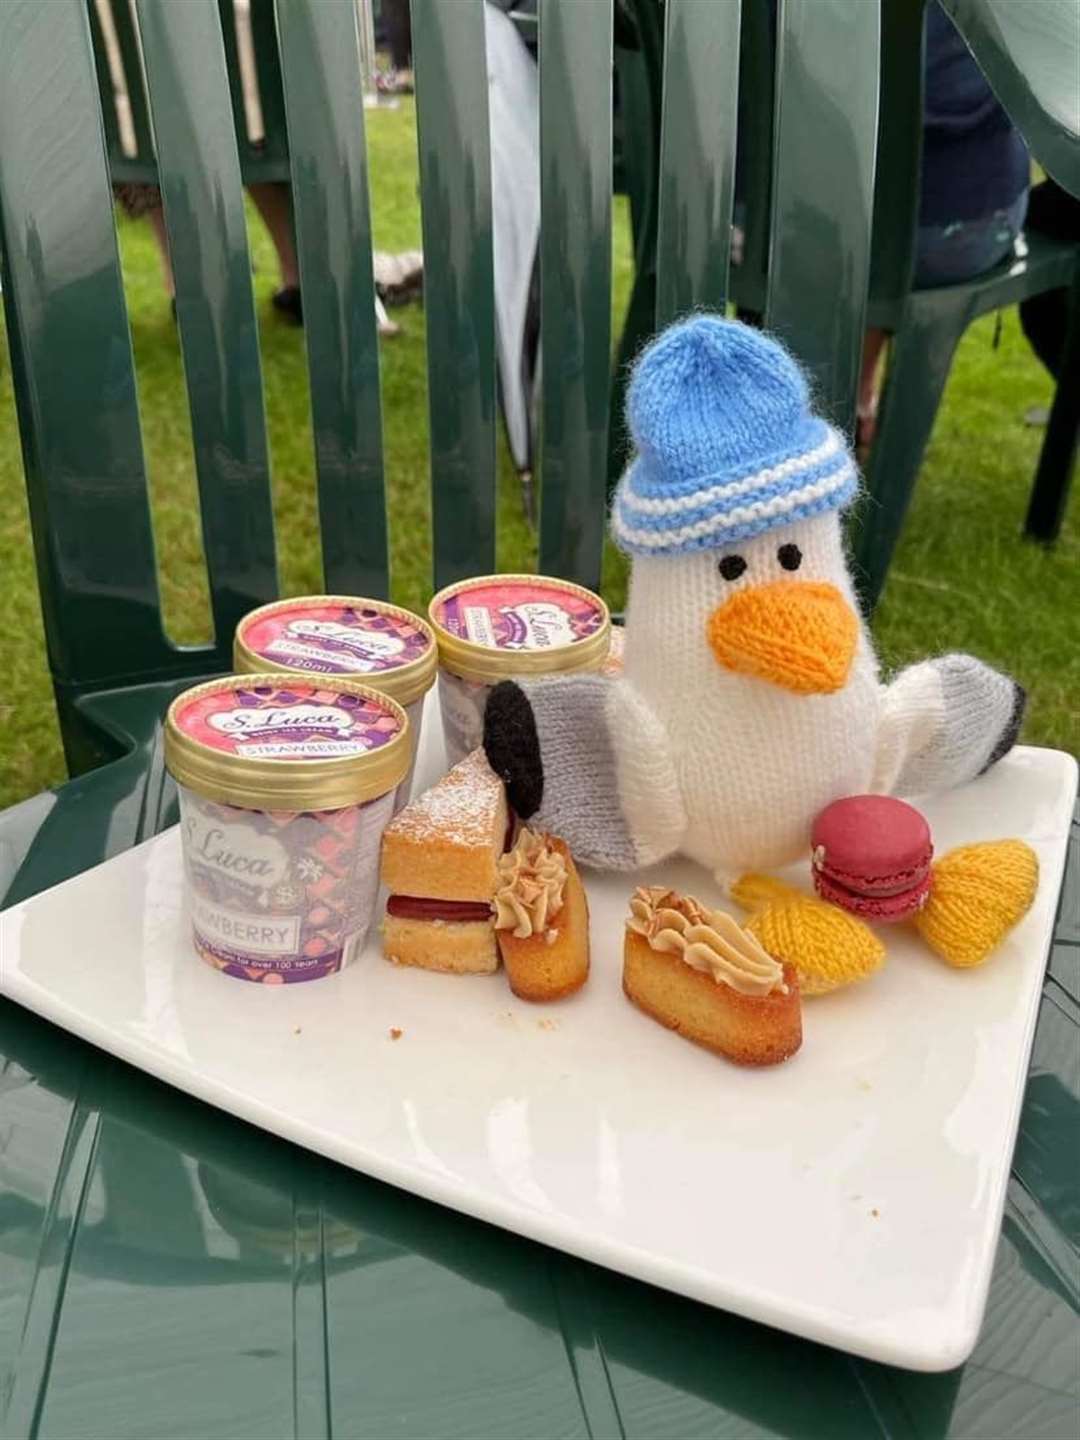 Steven Seagull tucks in to some goodies at the royal garden party at Holyrood. Picture: Buckie's Roots